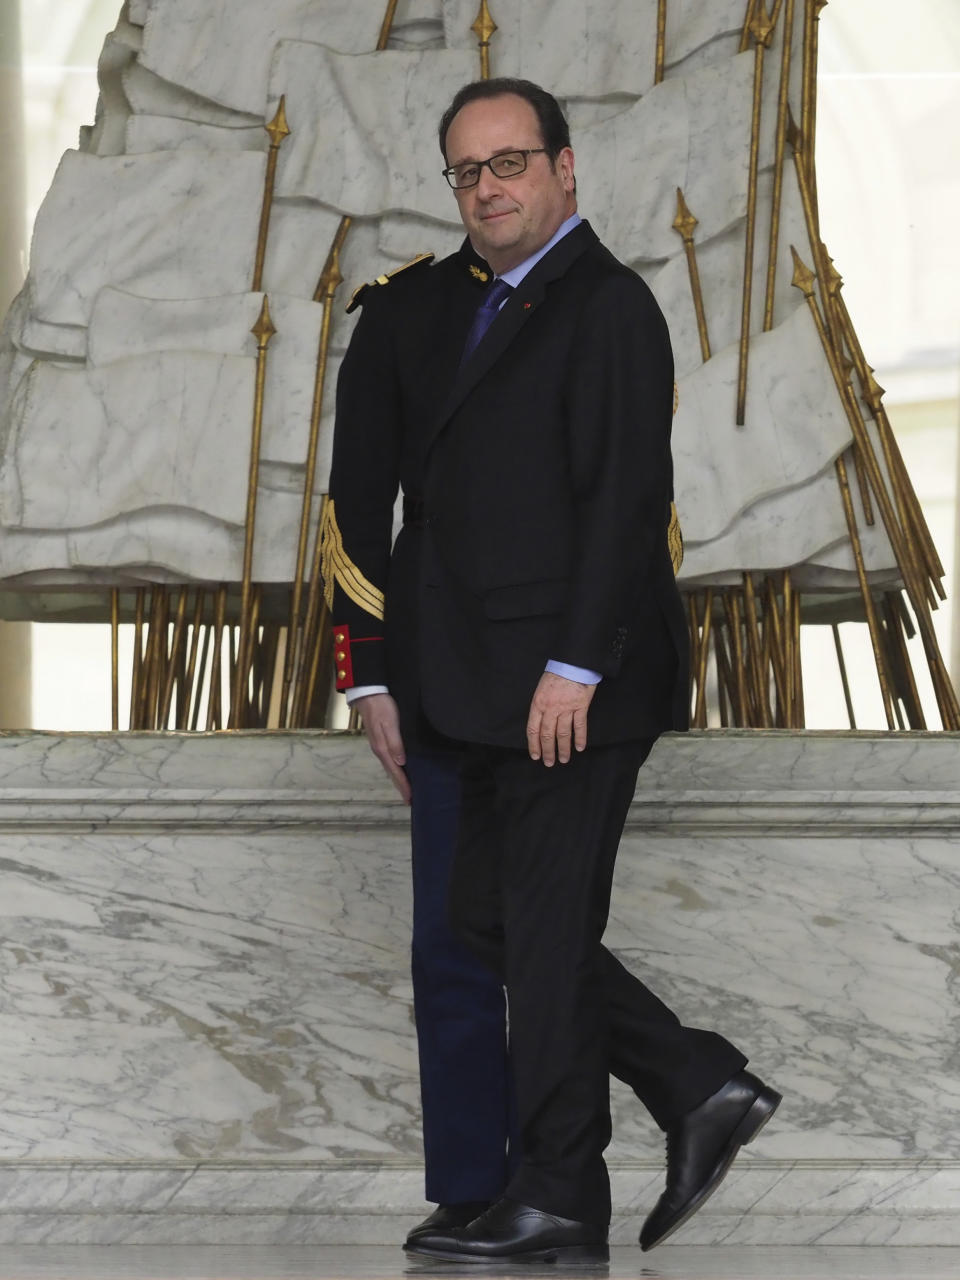 France's President Francois Hollande walks on the lobby of the Elysee Palace after the weekly cabinet meeting, in Paris, Wednesday, March 22, 2017. (AP Photo/Thibault Camus)